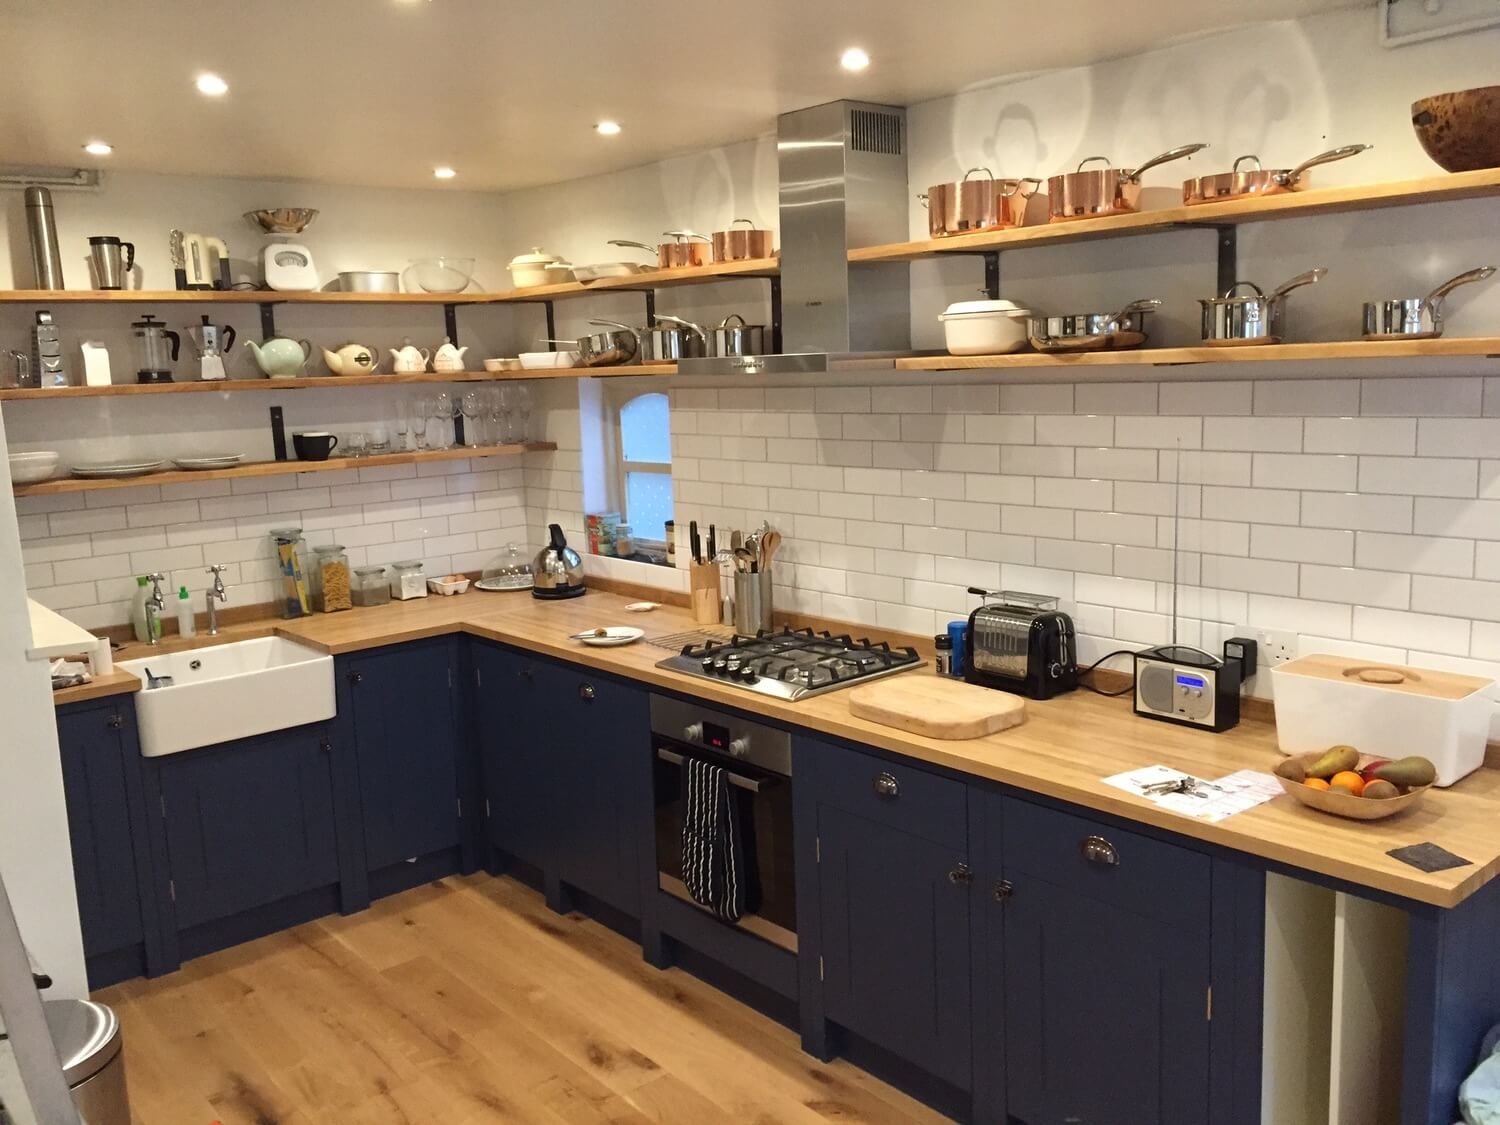 https://foter.com/photos/424/kitchen-with-long-shelves-on-different-levels.jpg